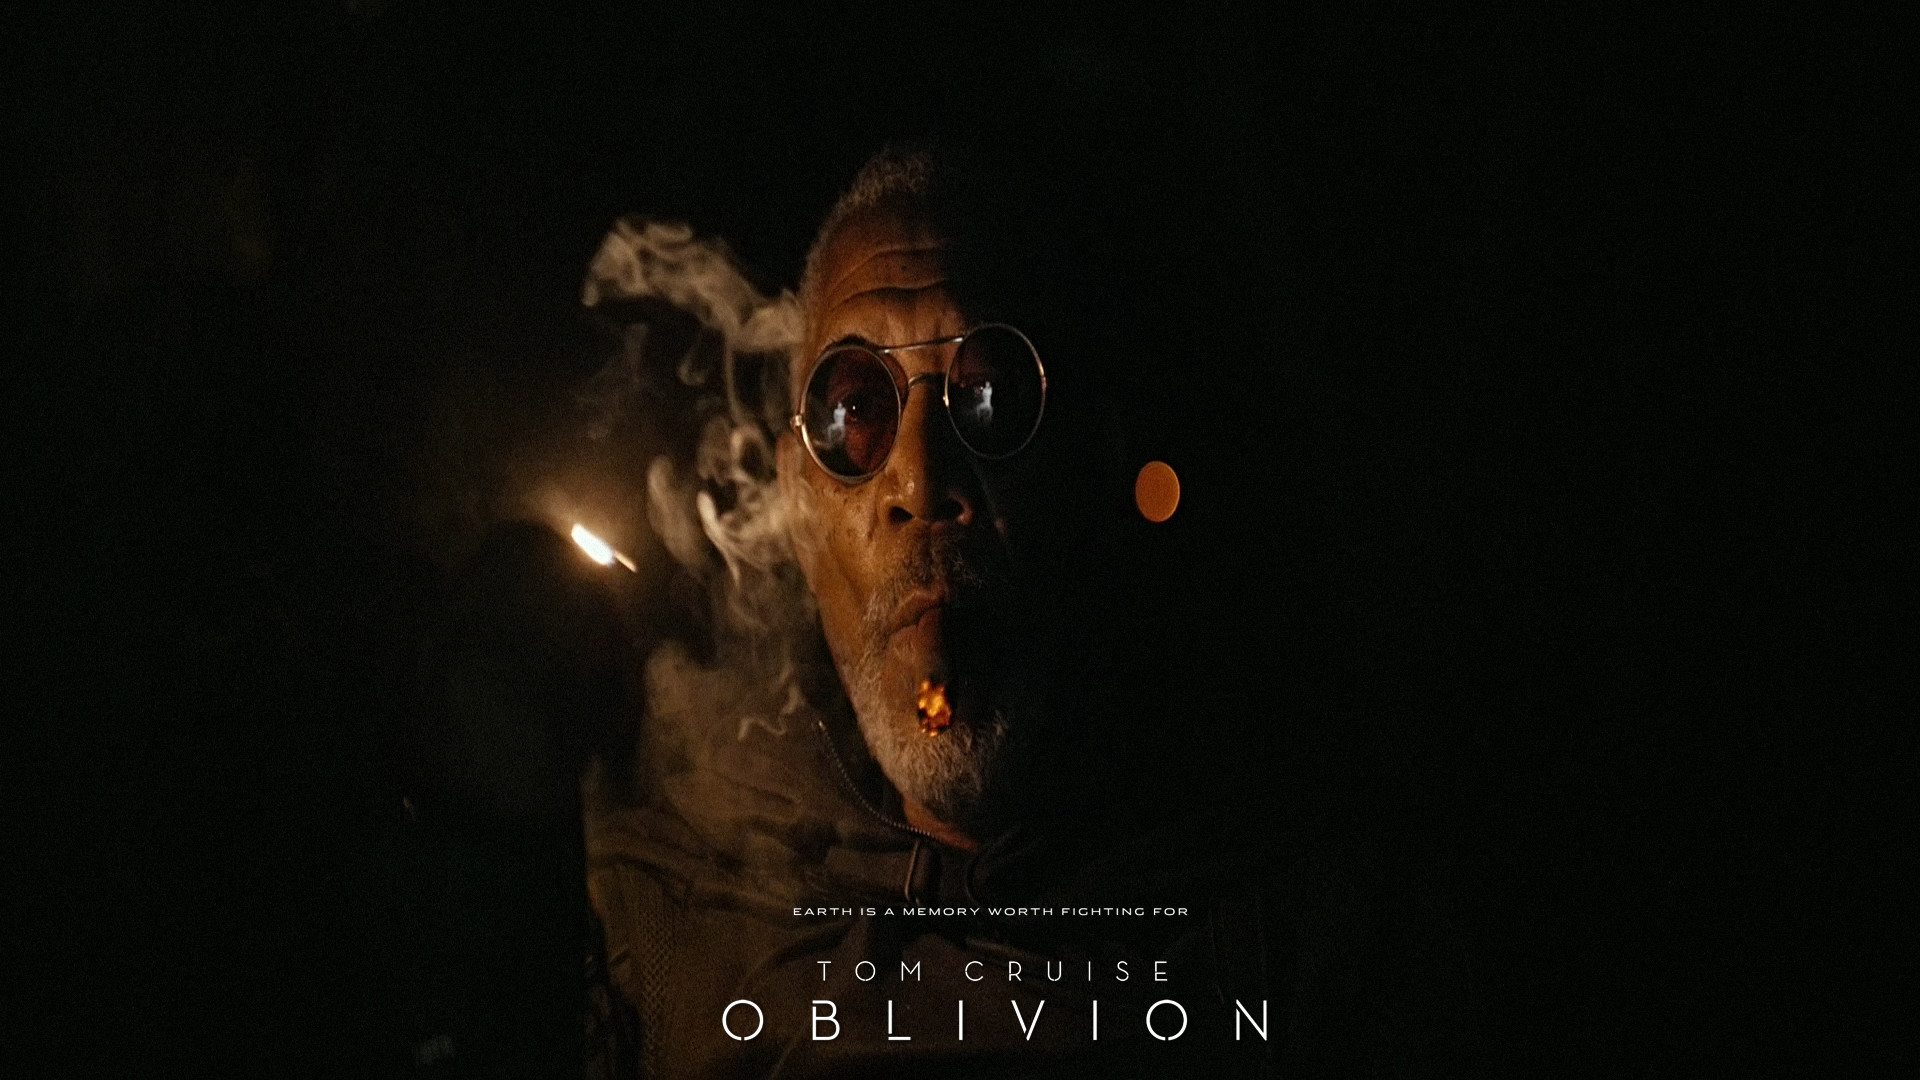 1920x1080 20 HD wallpapers/screenshots of "Oblivion" with Tom ...